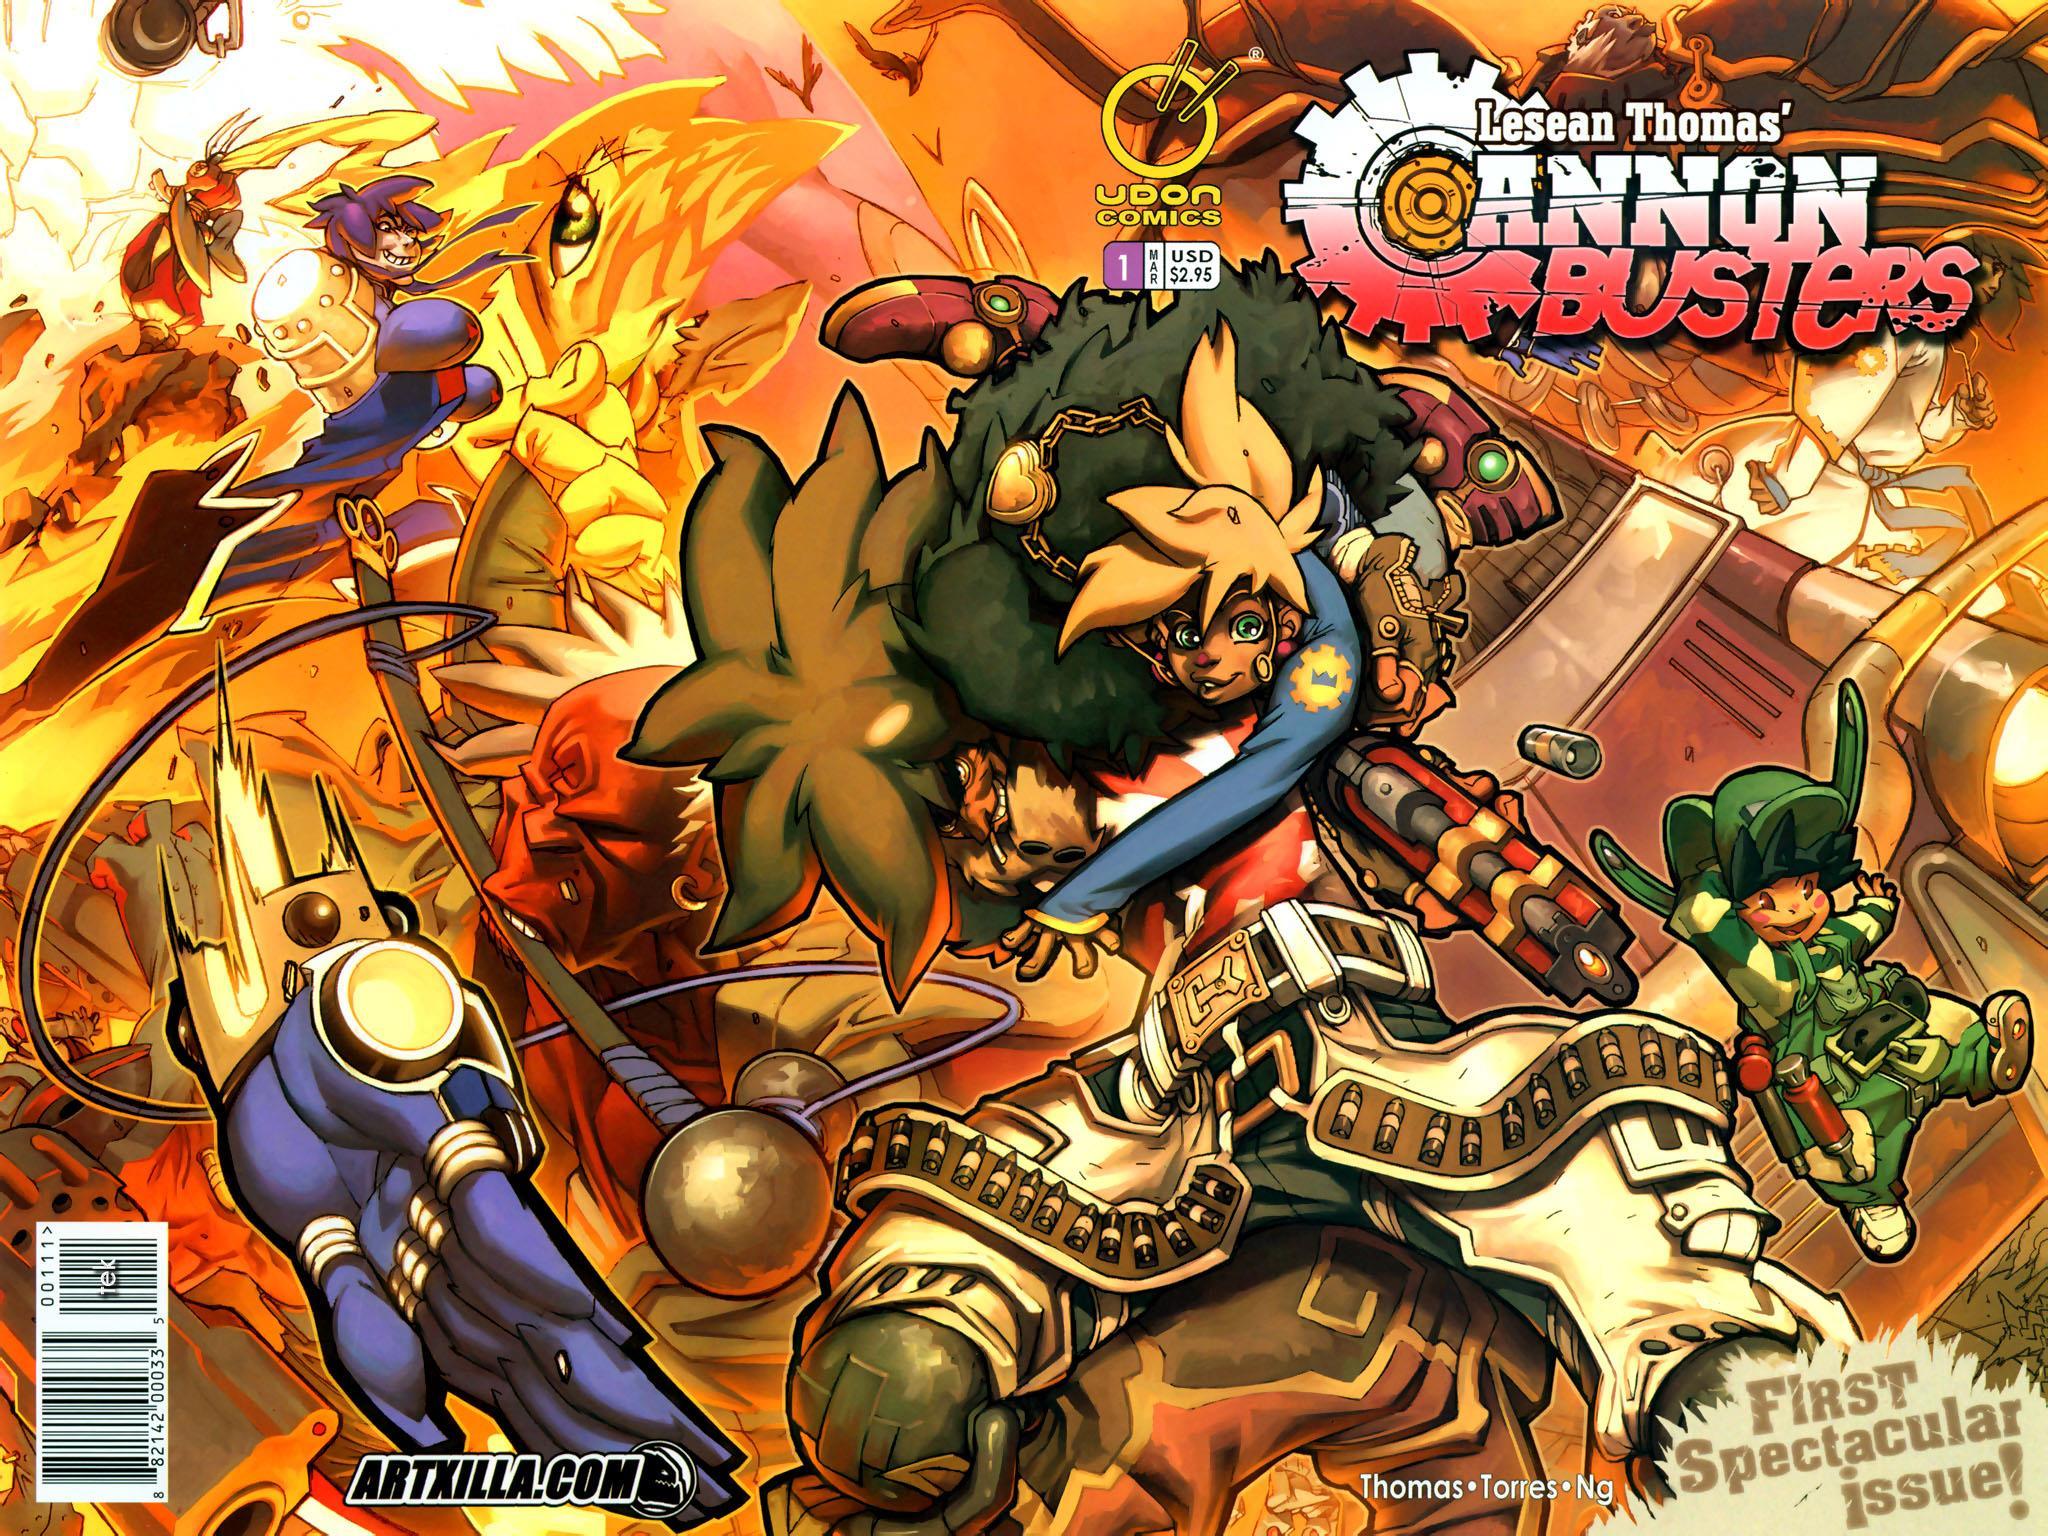 cannon busters wallpapers wallpaper cave on cannon busters wallpapers